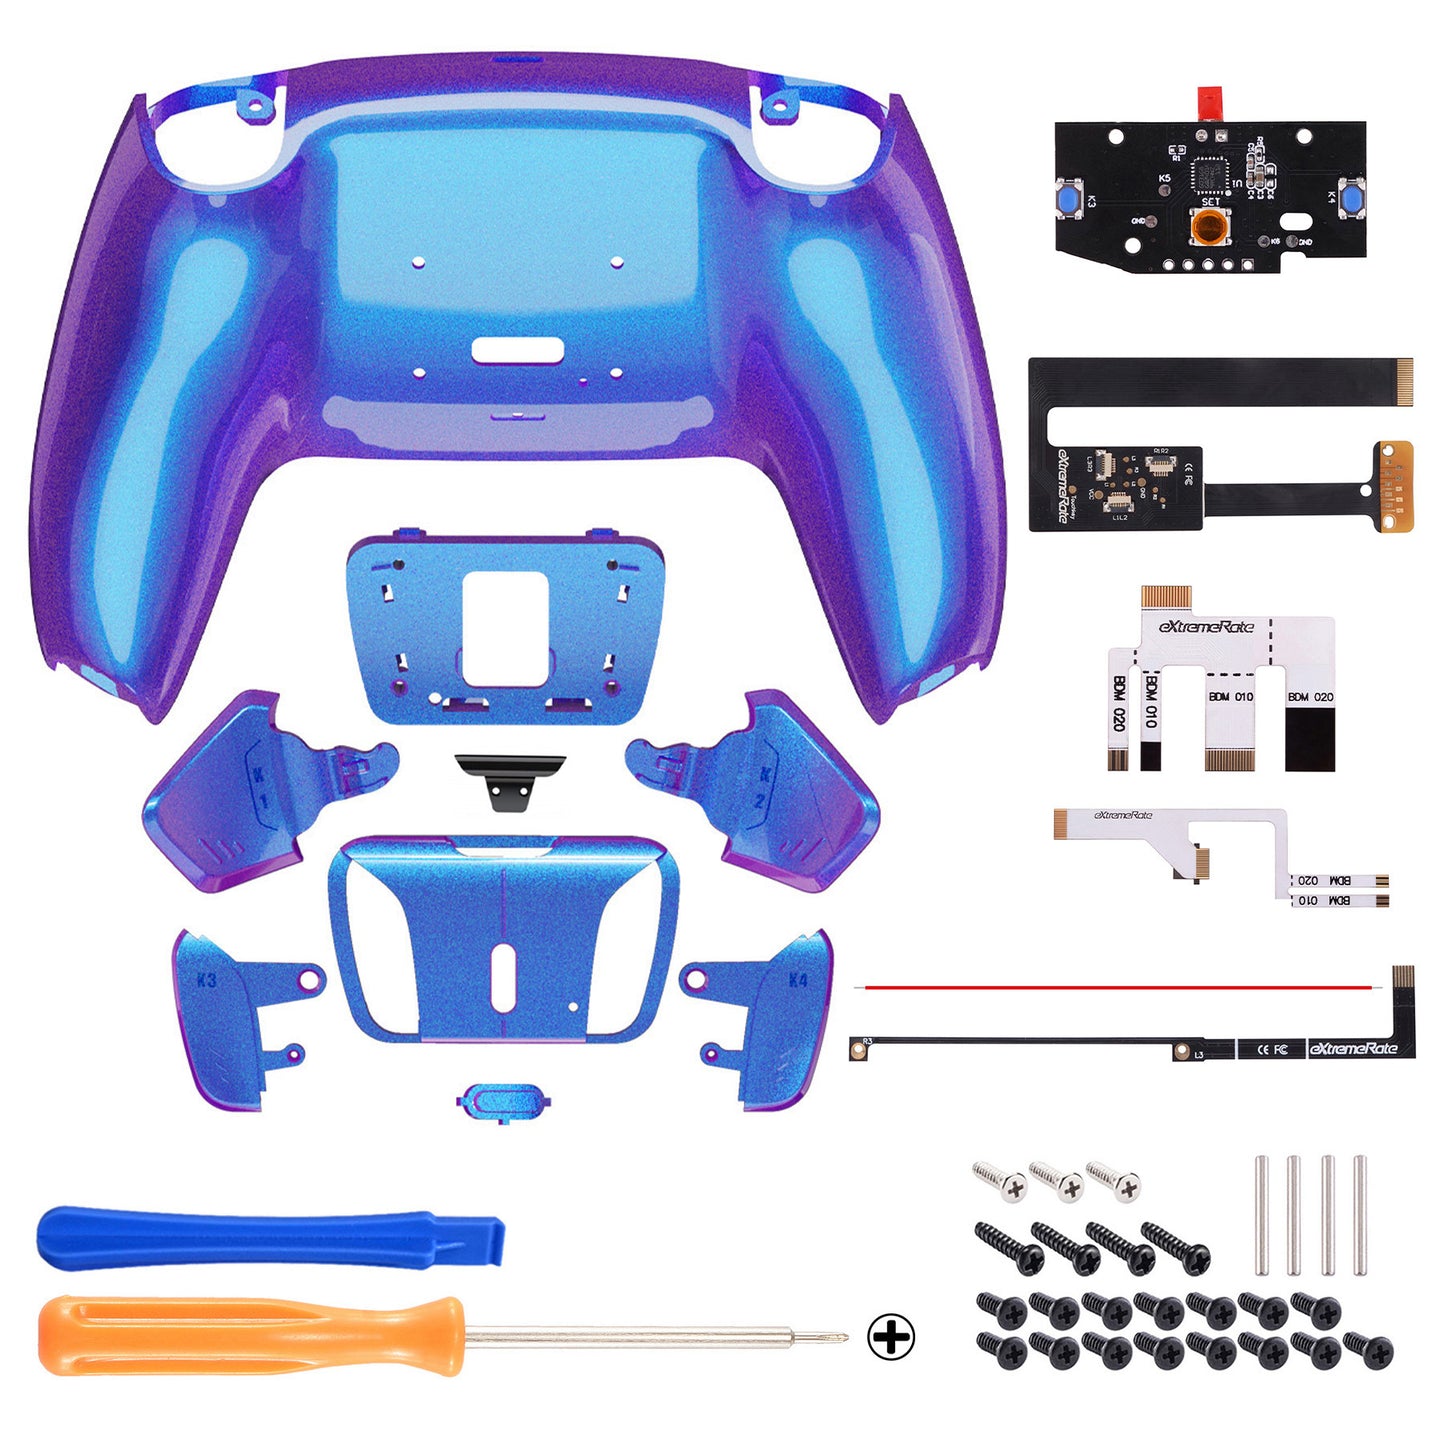 eXtremeRate Remappable RISE 4.0 Remap Kit for PS5 Controller BDM-010/020 - Chameleon Purple Blue eXtremeRate